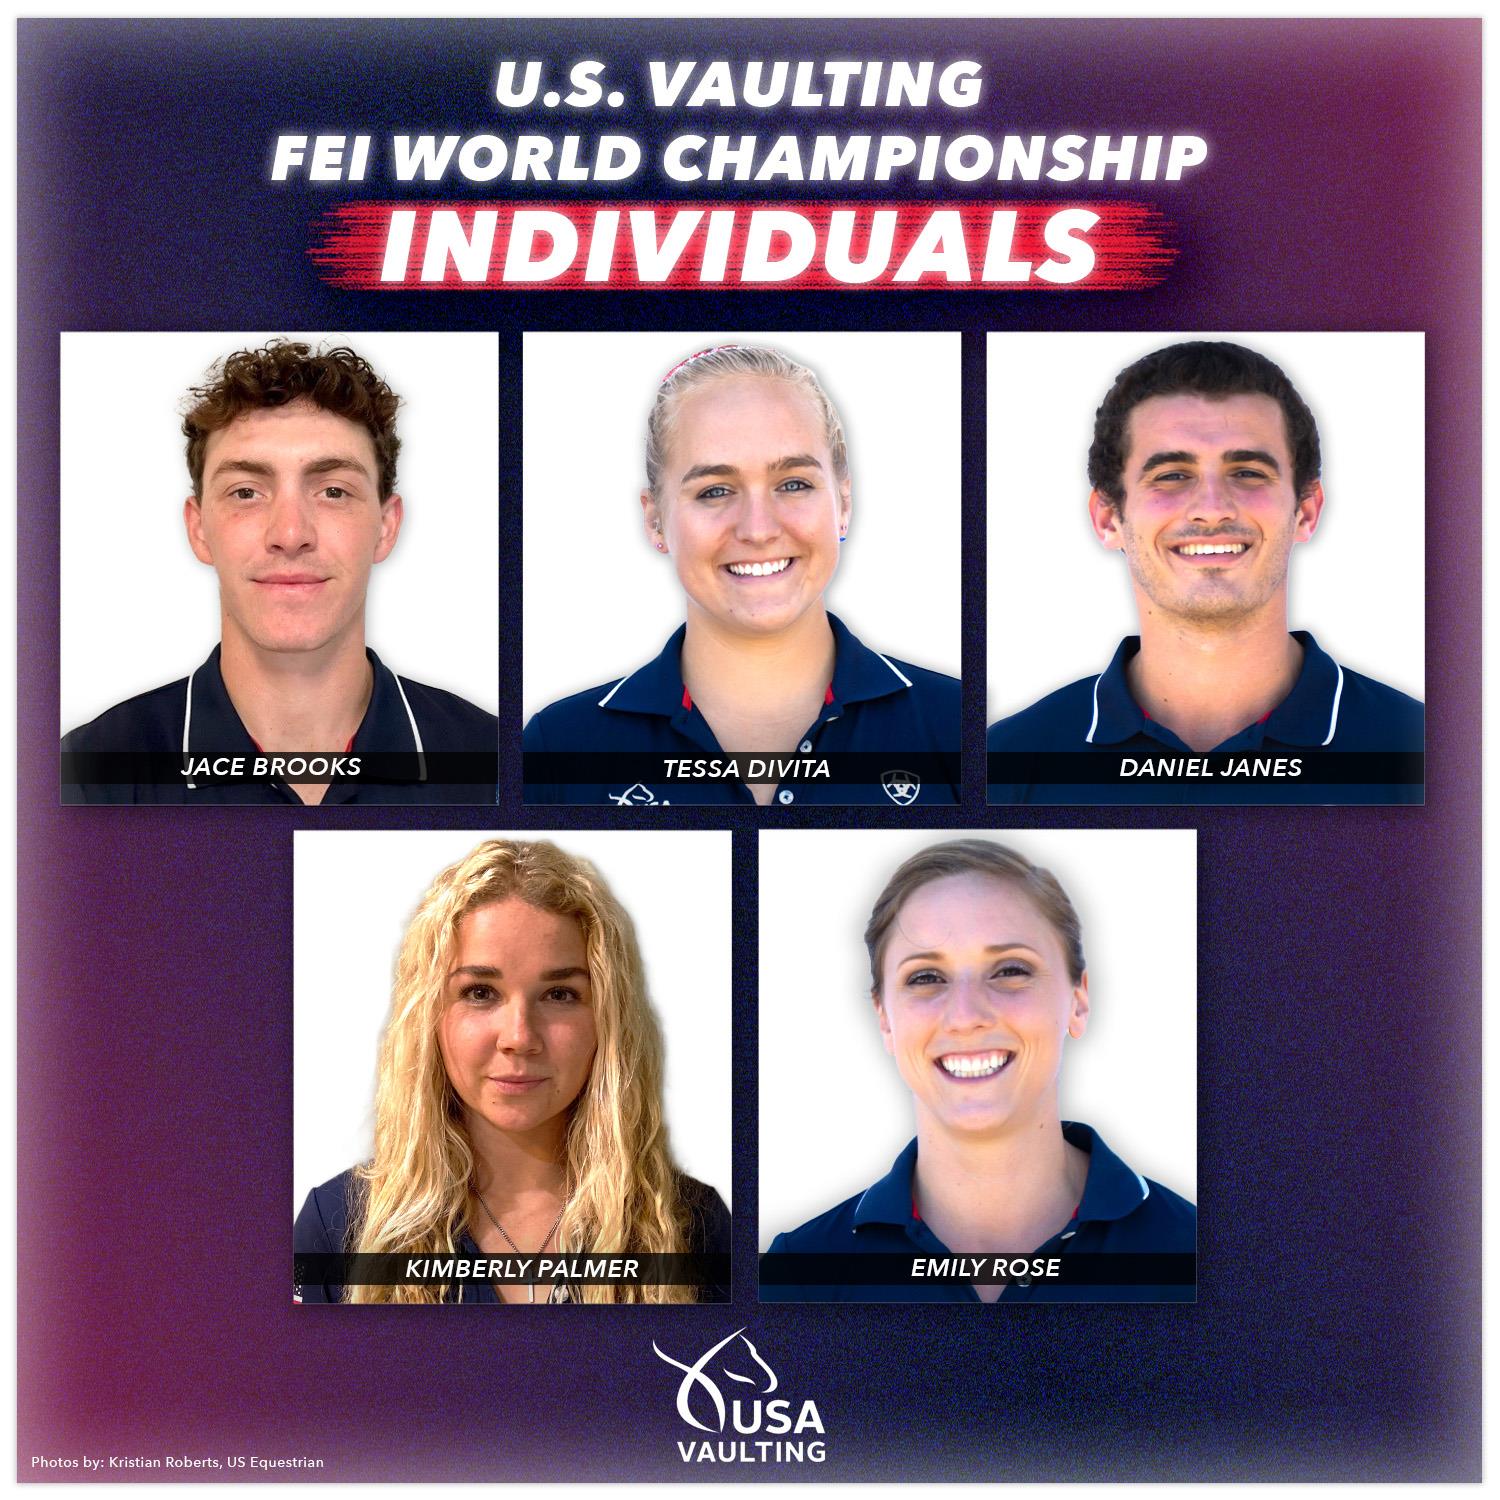 Individual vaulters for the U.S. Vaulting Team at the 2022 FEI World Championship